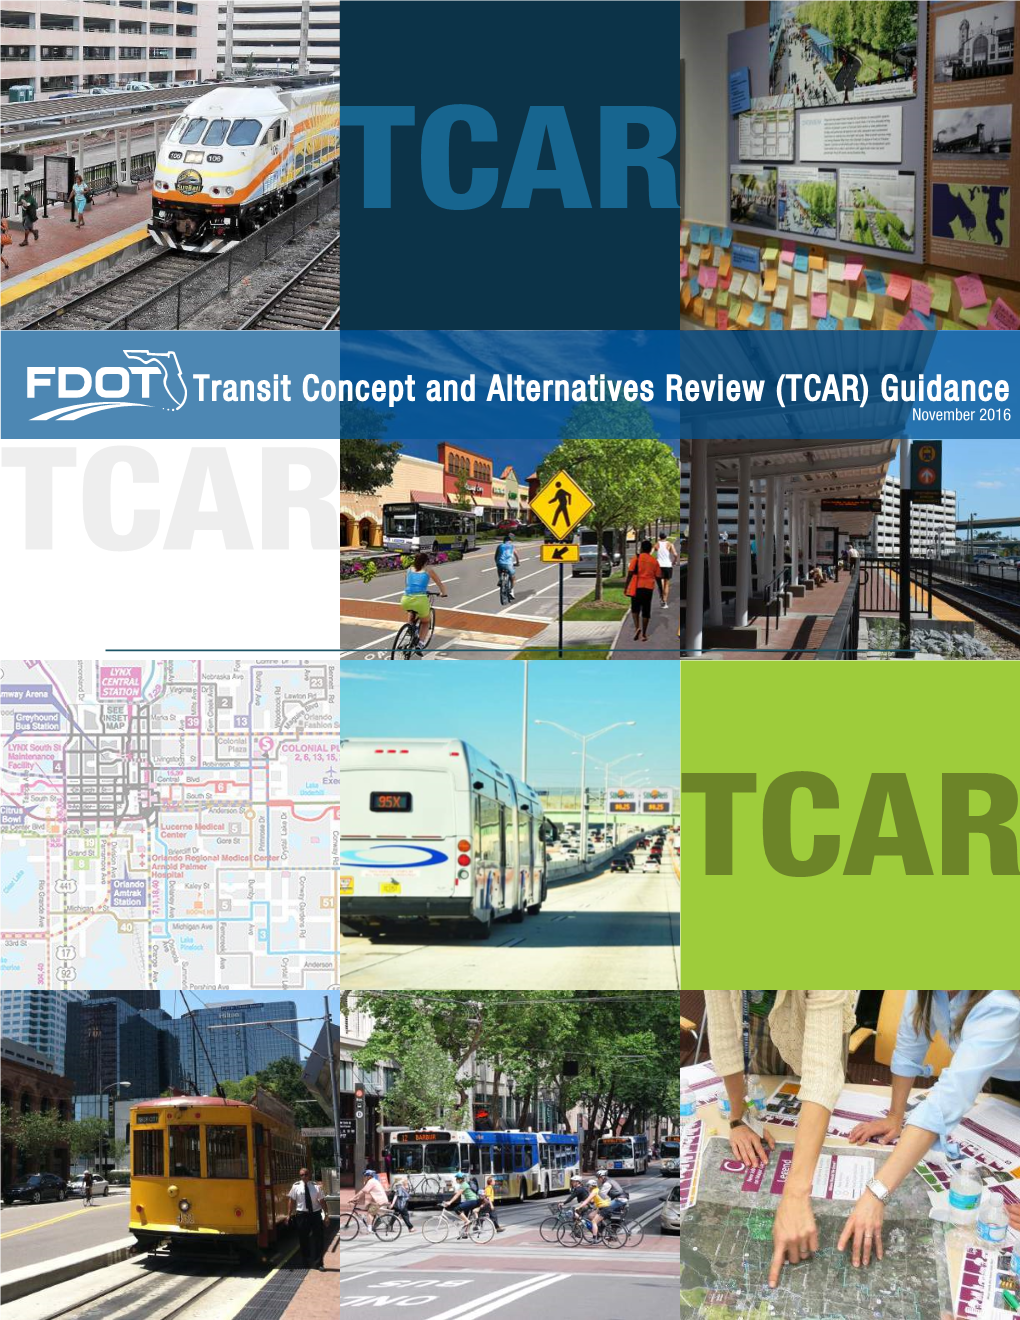 Transit Concept and Alternatives Review (TCAR) Guidance November 2016 TCAR